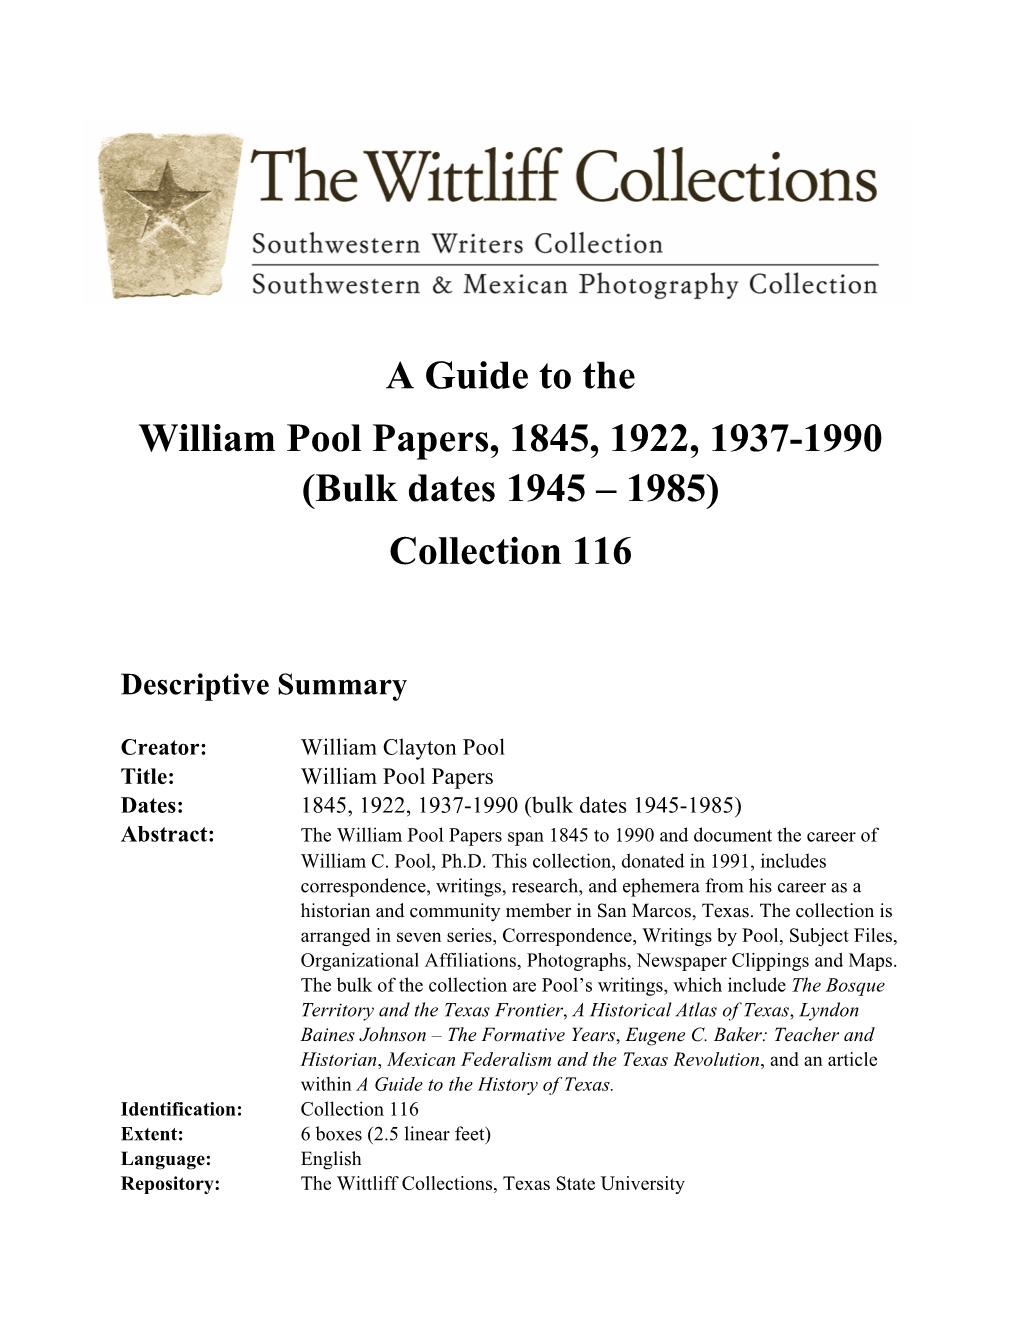 A Guide to the William Pool Papers, 1845, 1922, 1937-1990 (Bulk Dates 1945 – 1985) Collection 116